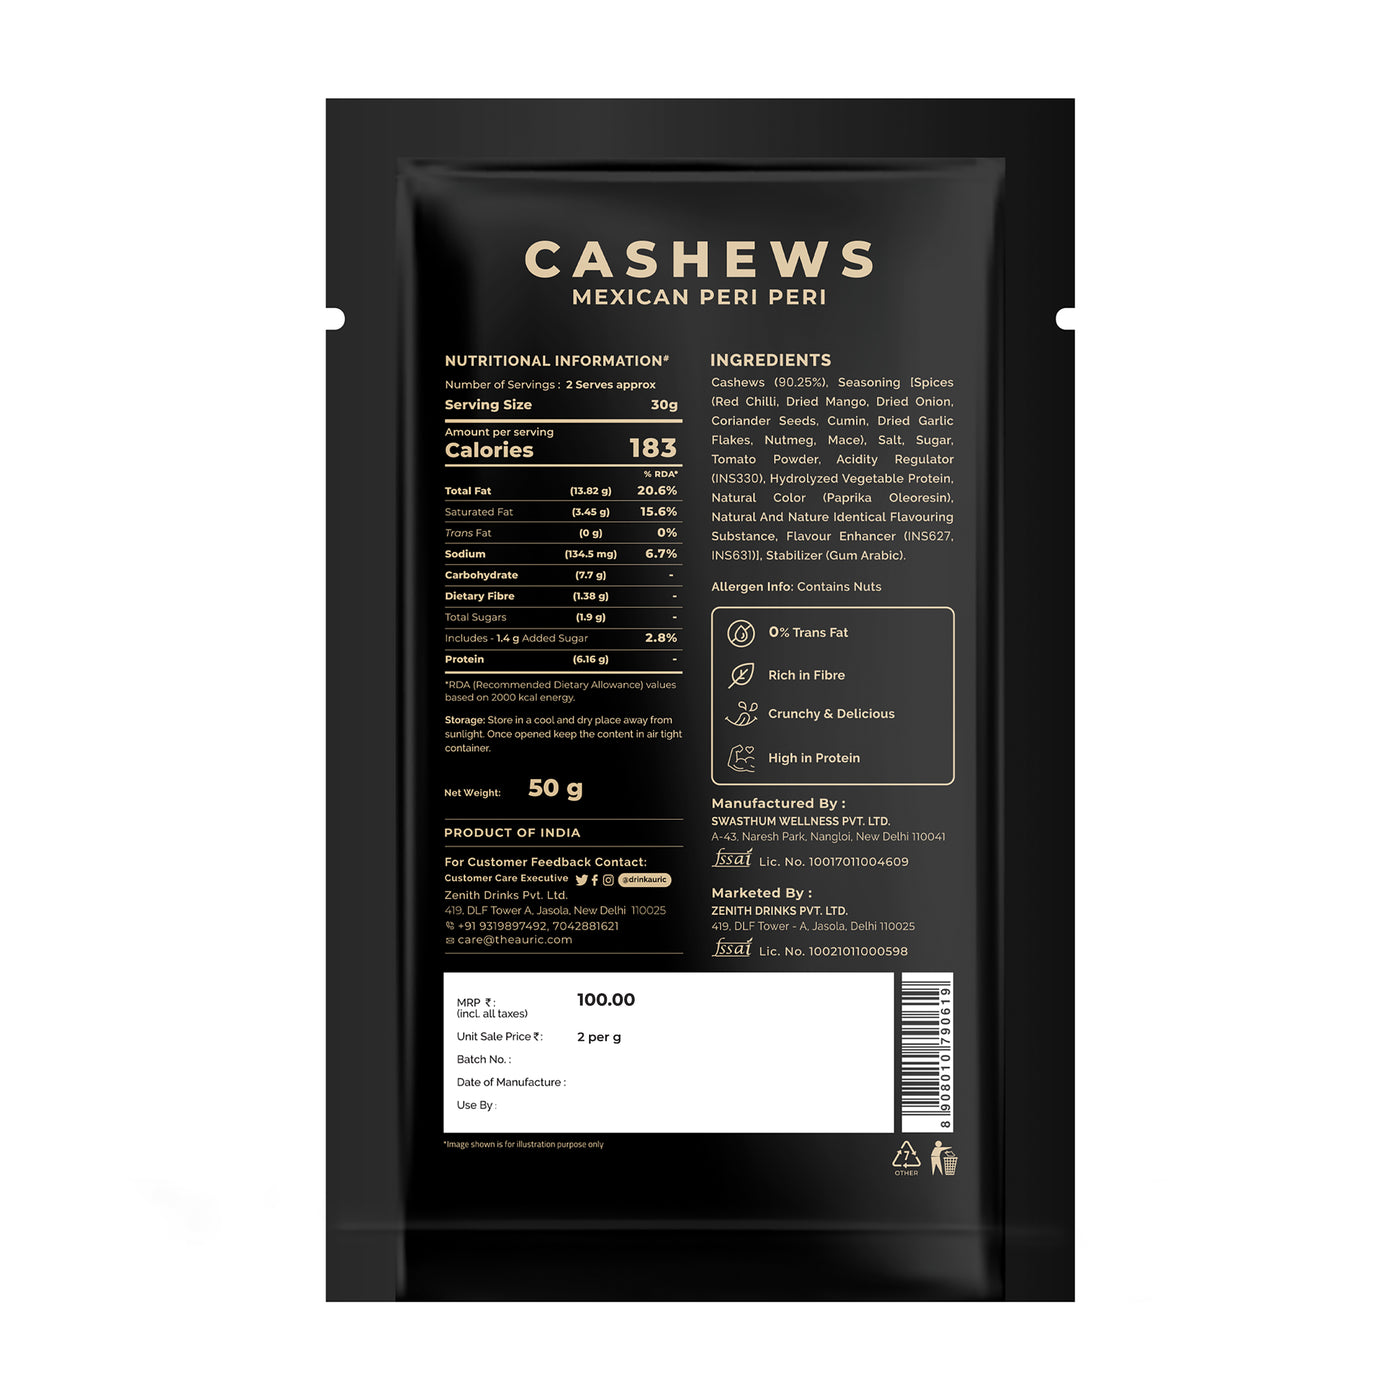 Oven Roasted Mexican Peri Peri Cashews (50g x 4 packs)